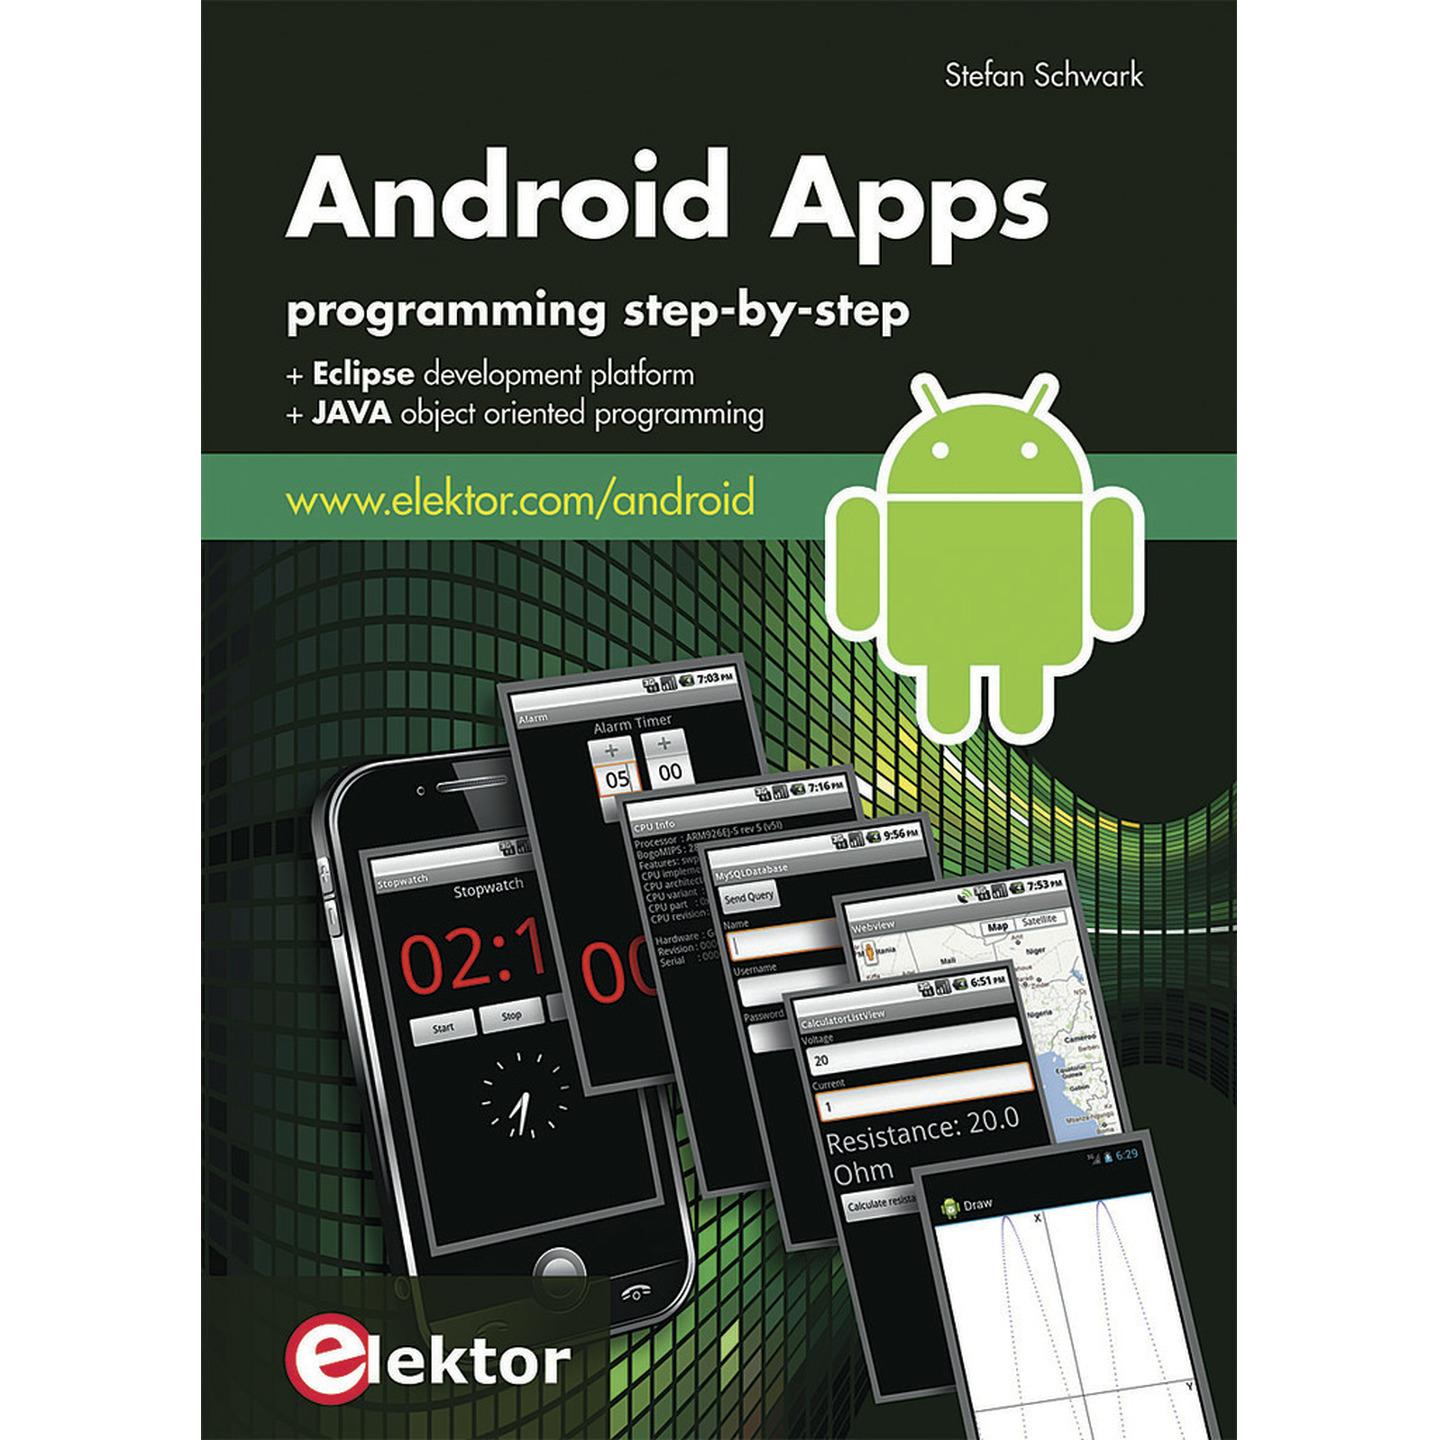 Android Apps - Programming Step-by-Step